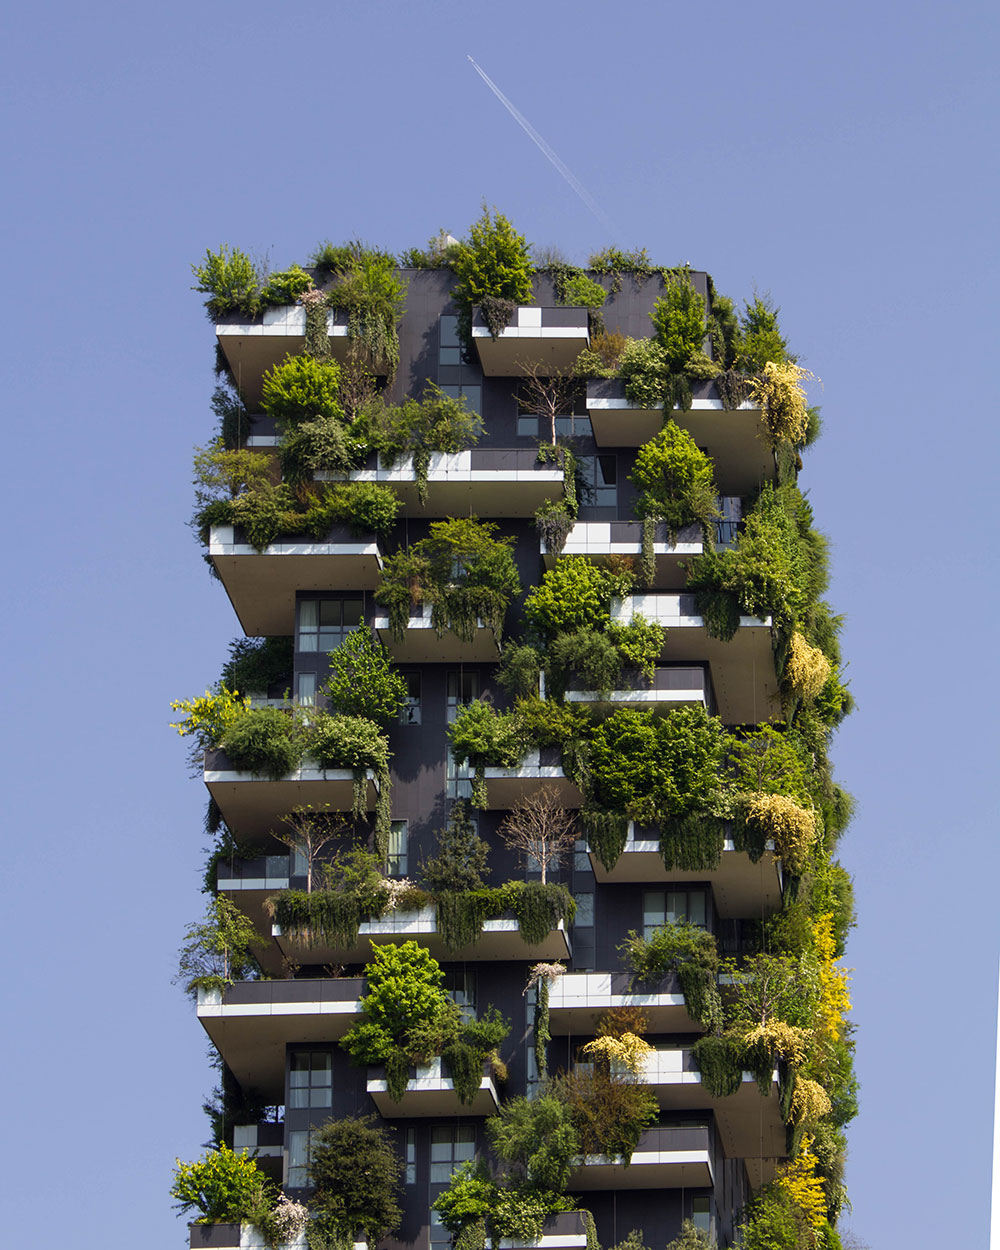 Sustainable Architecture to Minimize Negative Environmental Impacts